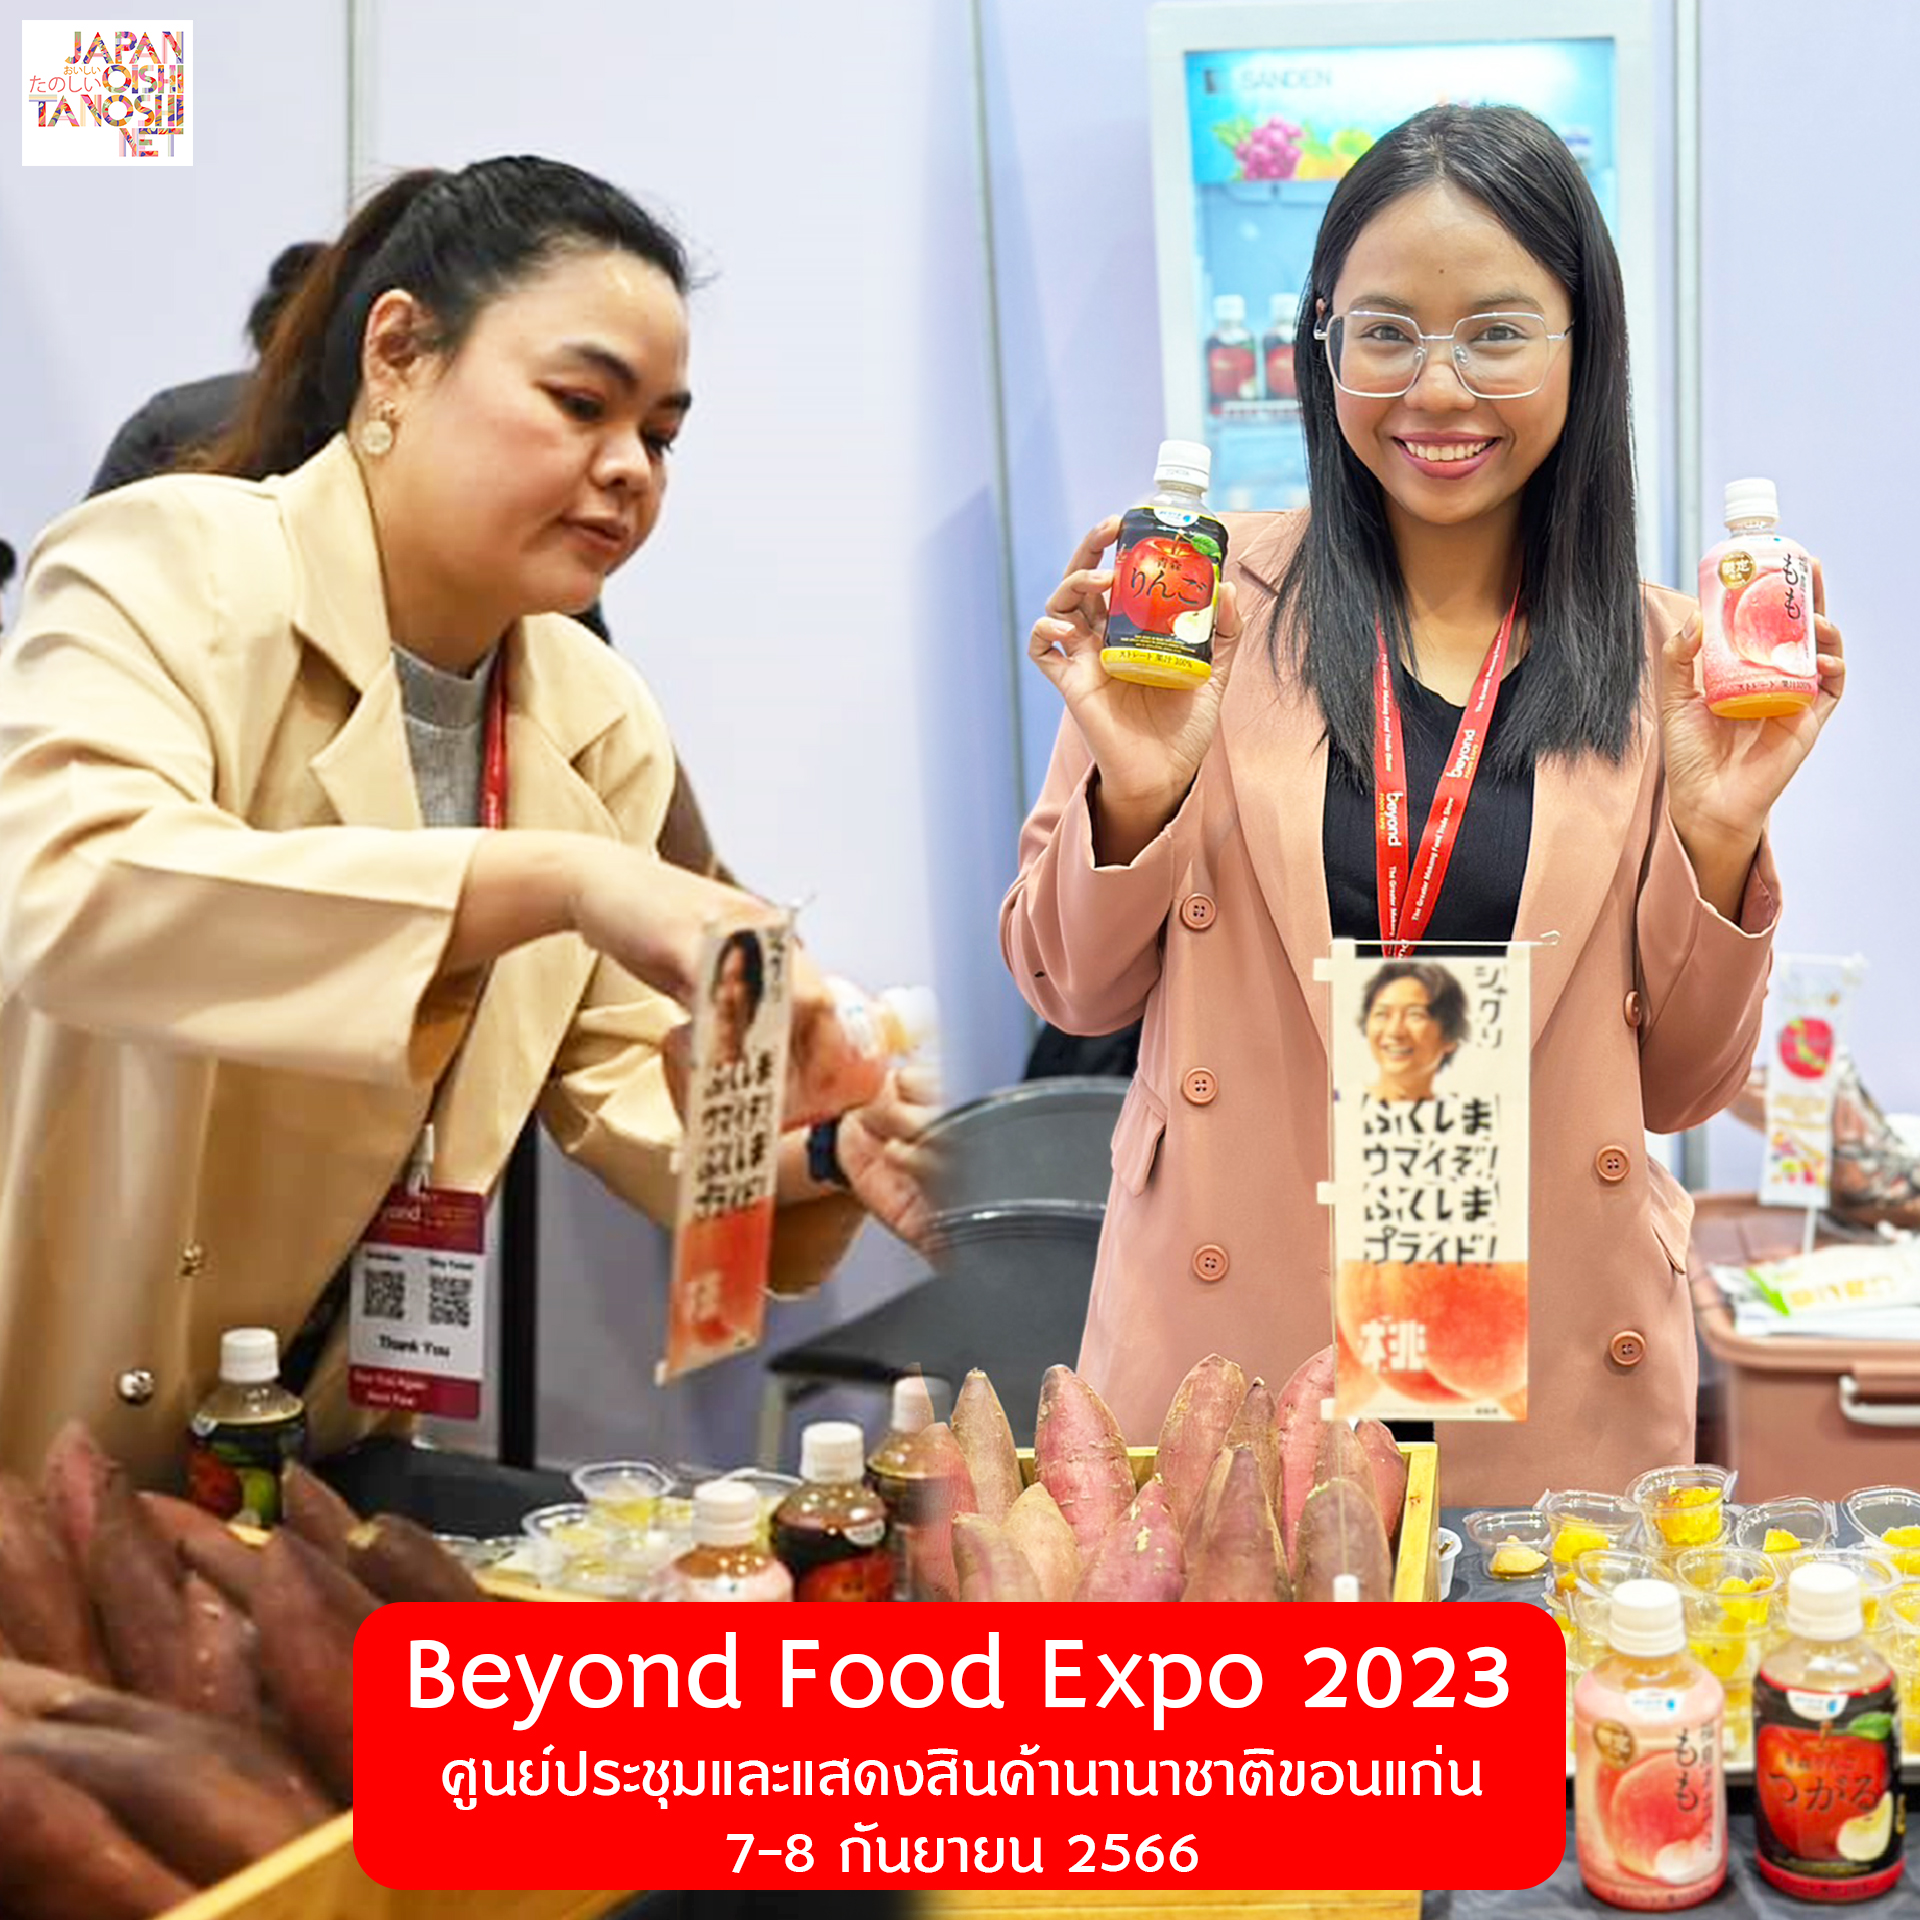 The event BEYOND FOOD EXPO 2023 has ended on 7-8 September 2023 at the Khon Kaen International Convention and Exhibition Center.